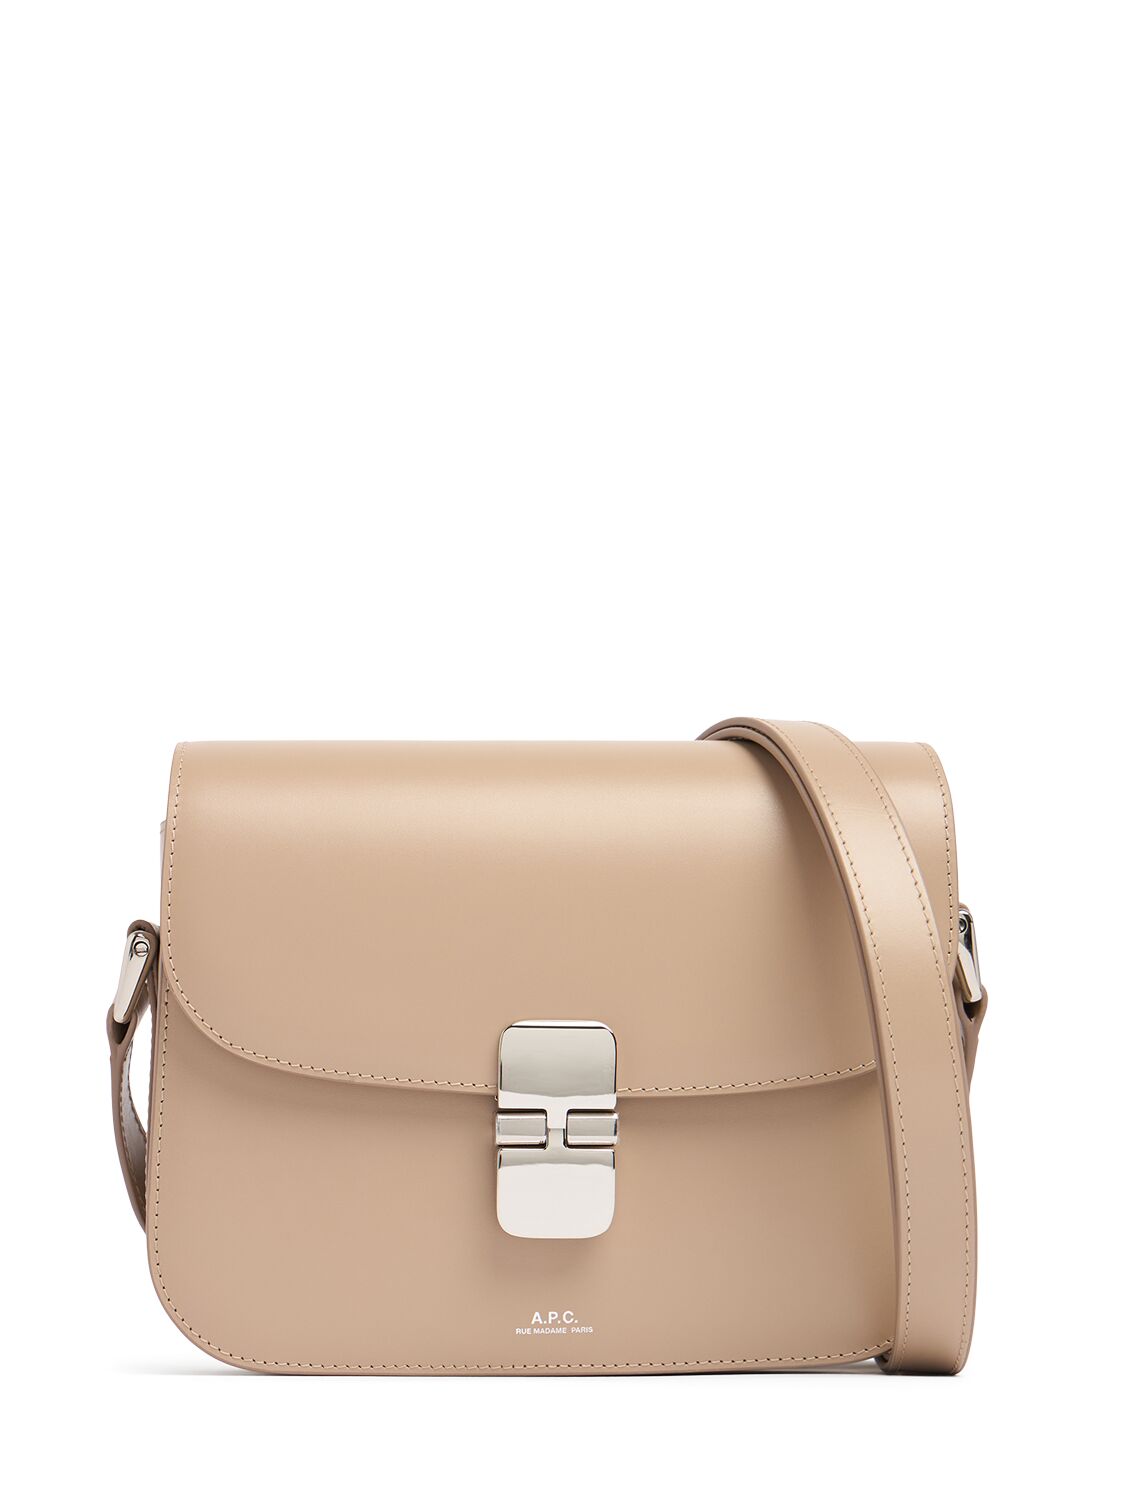 Apc Small Sac Grace Leather Shoulder Bag In Beige Nude